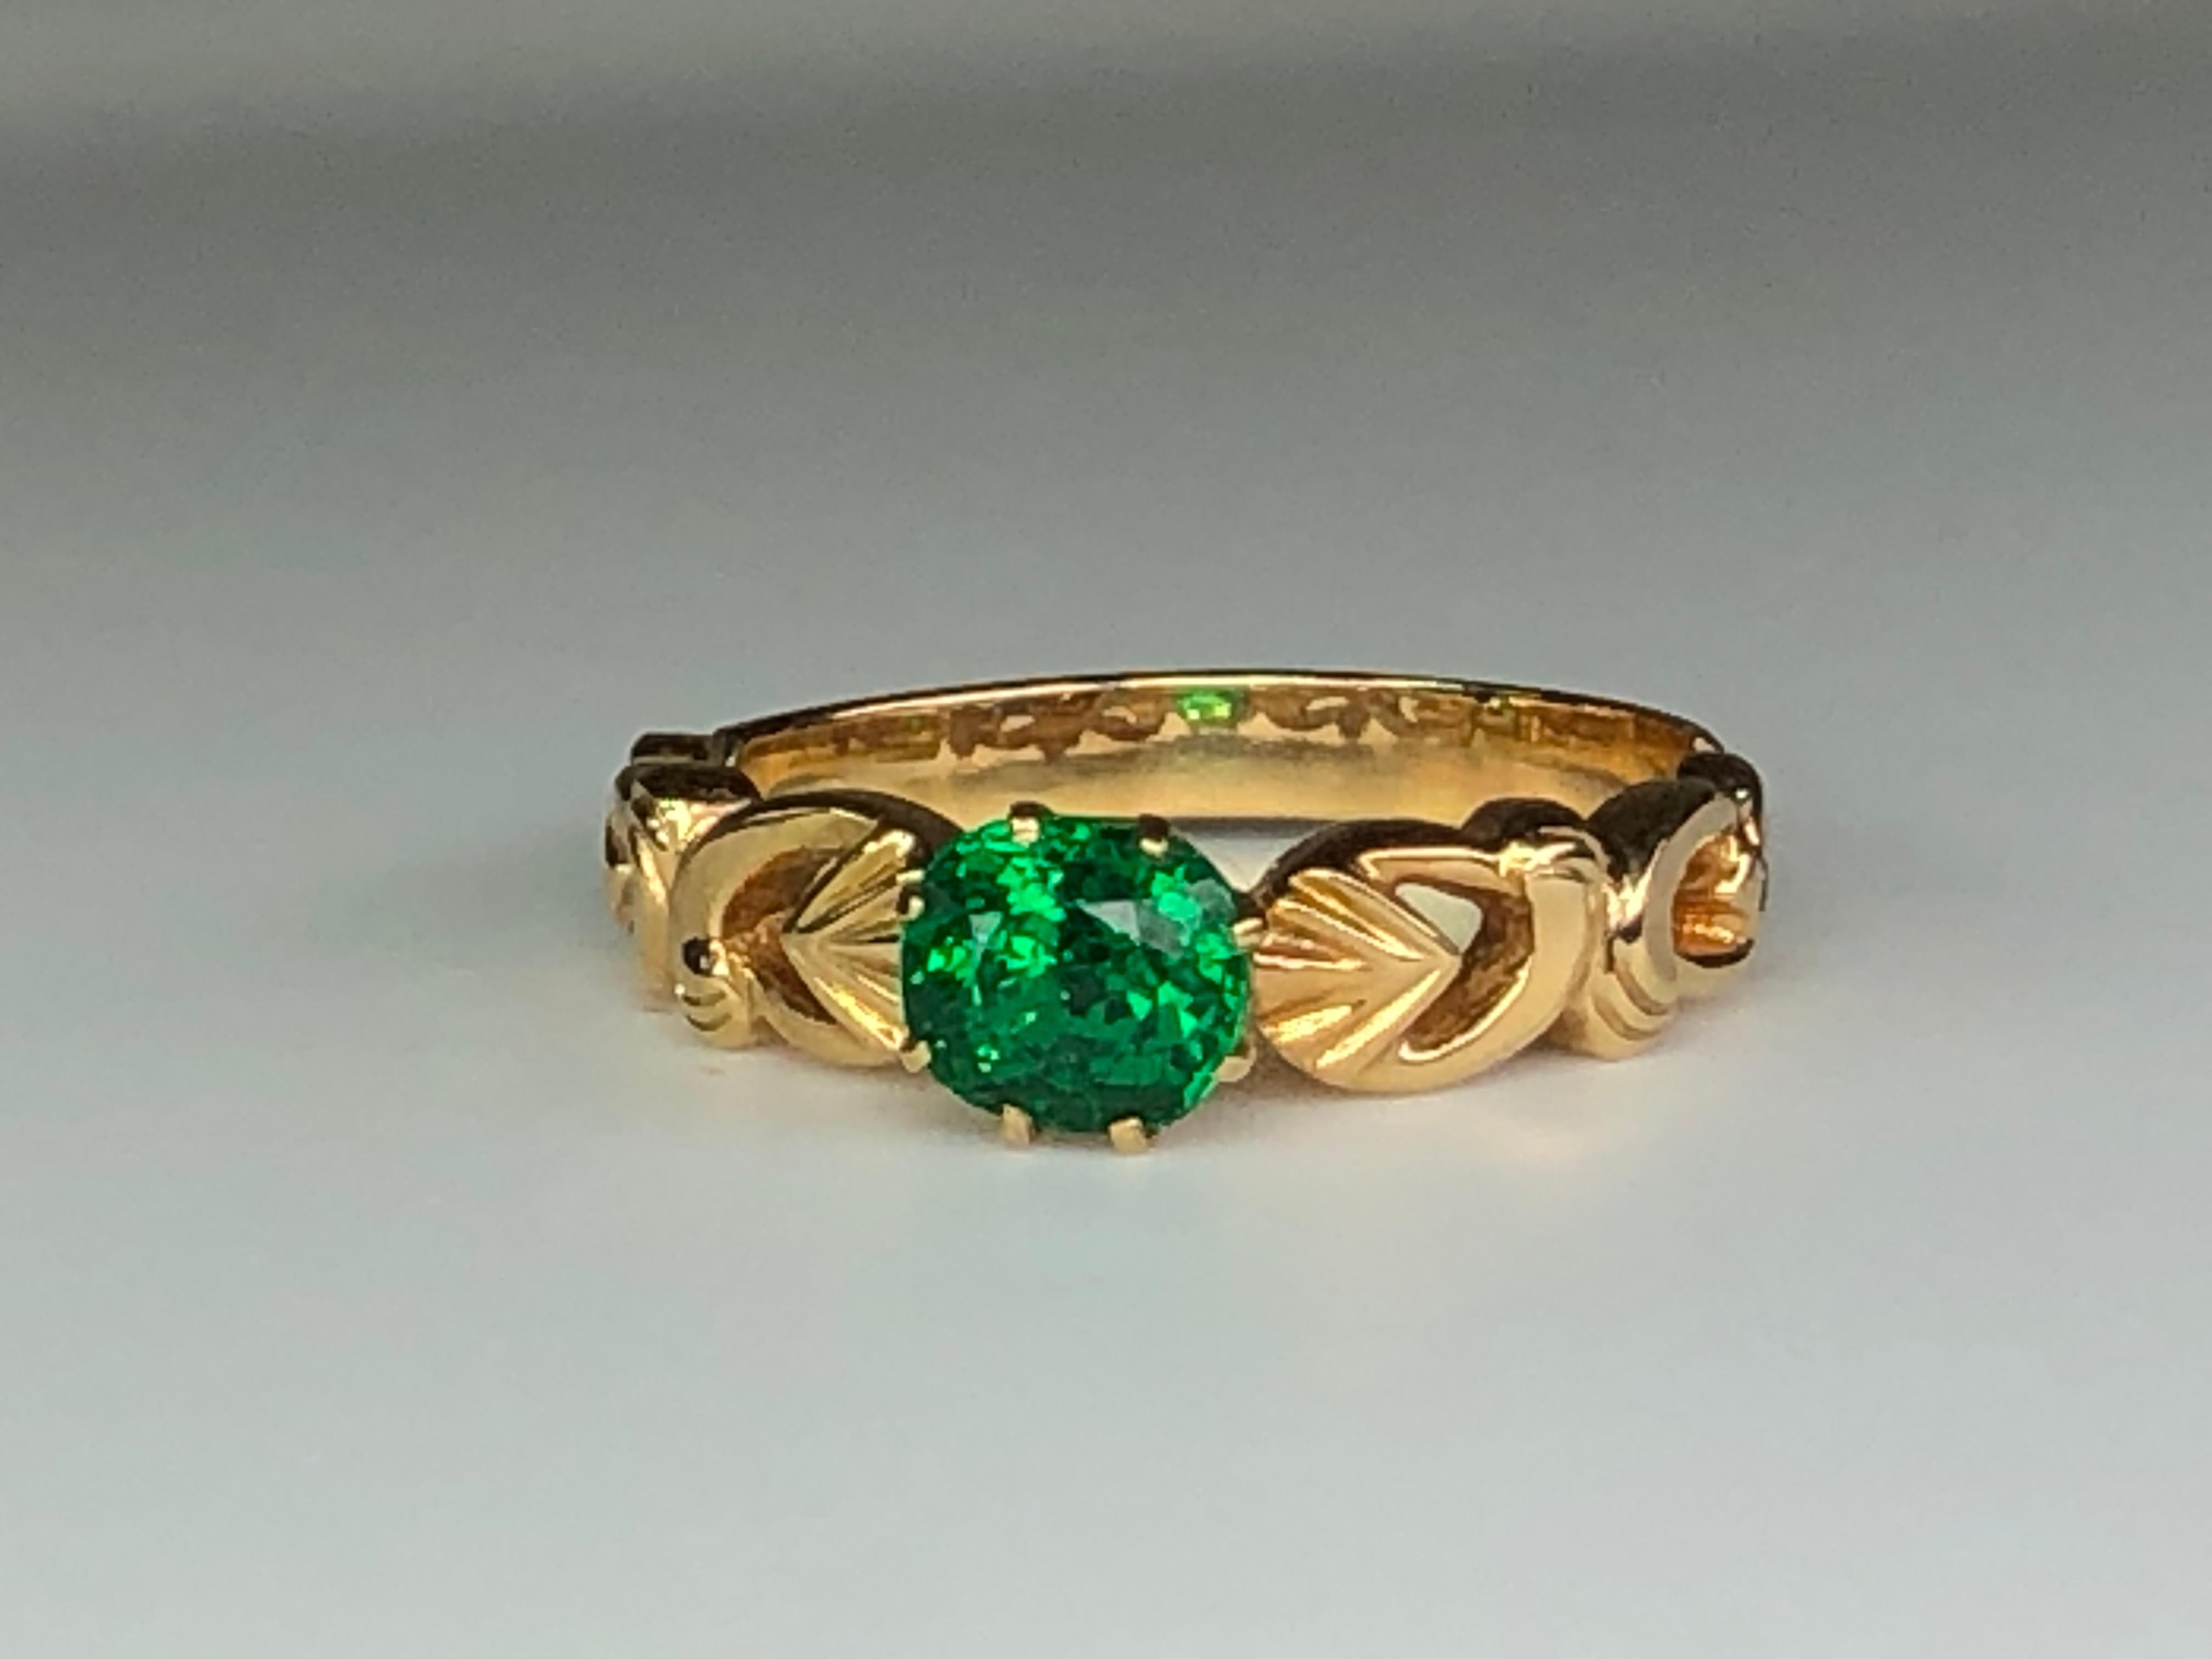 Absolutely stunning piece of the handcrafted ring! The stone layout is unique, colorful, and beautiful. The setting is accented nicely by hand engraved details on both shoulders. Really beautiful ring with a clean and strong fire Tsavorite. Would